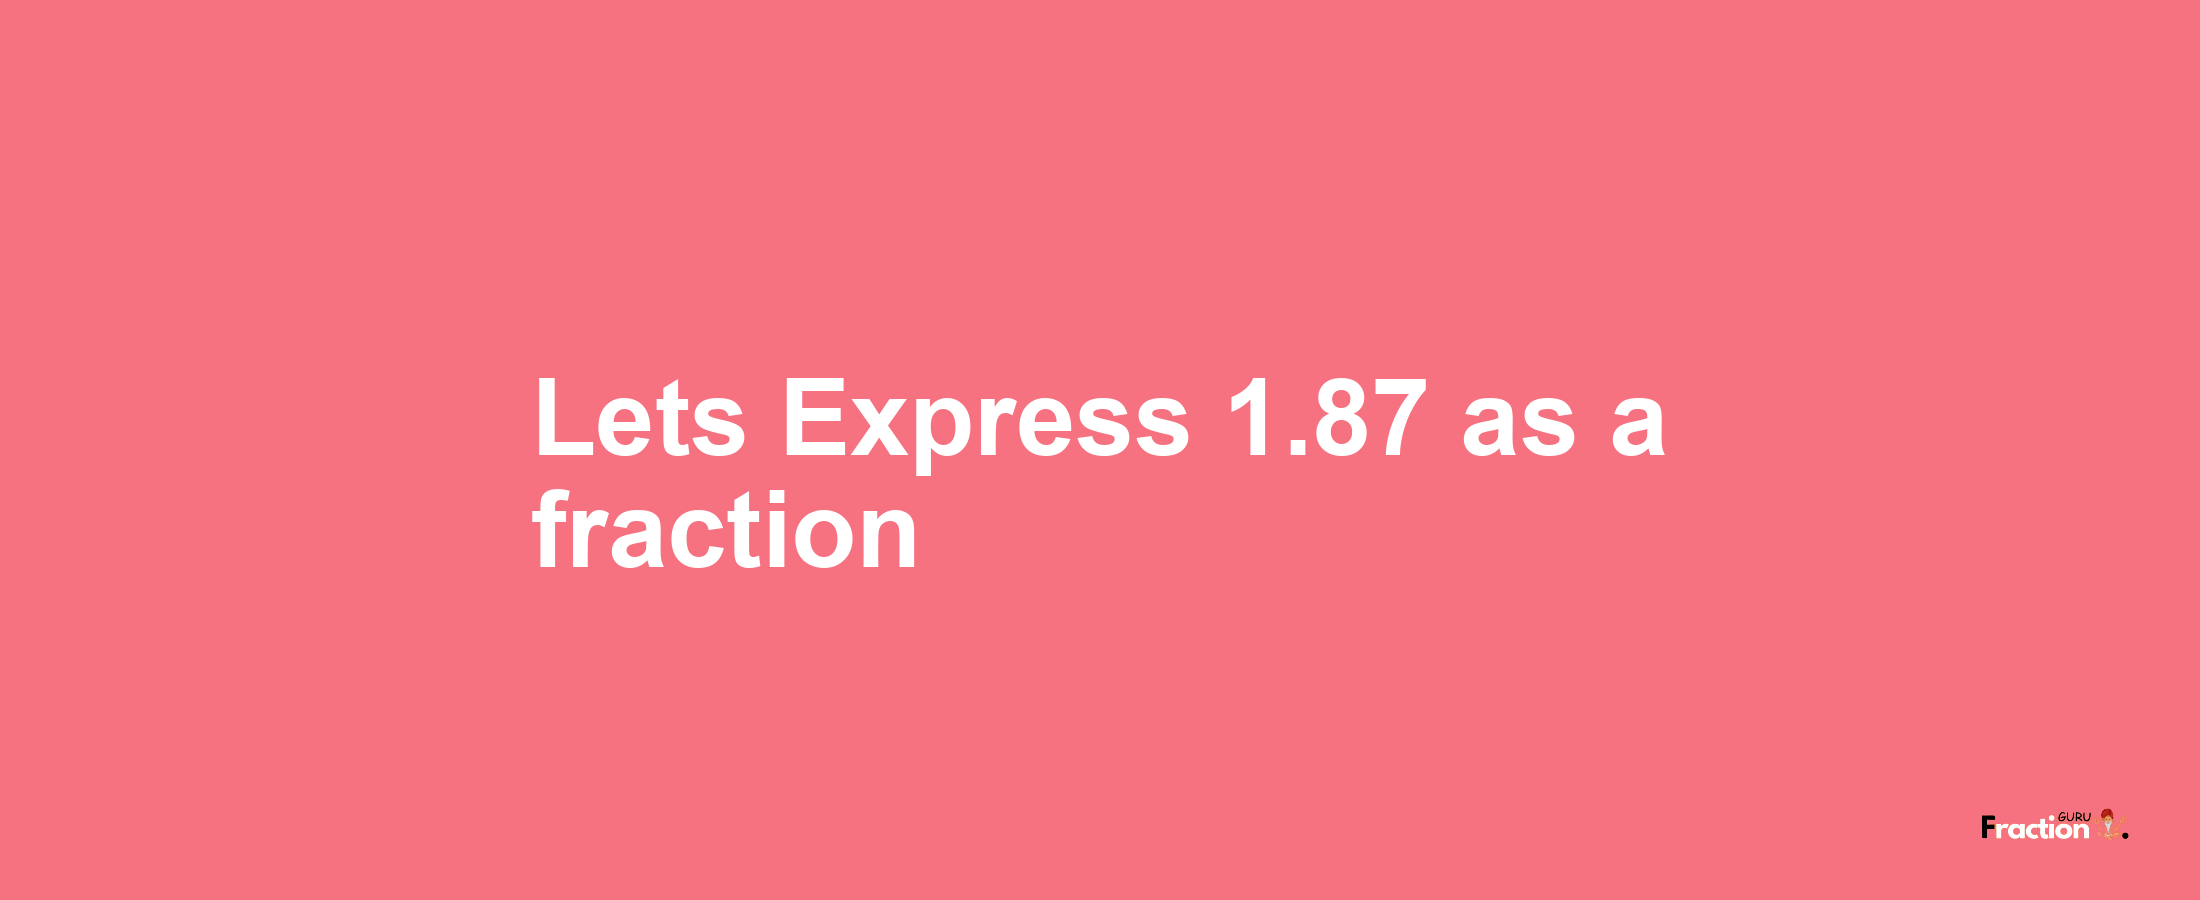 Lets Express 1.87 as afraction